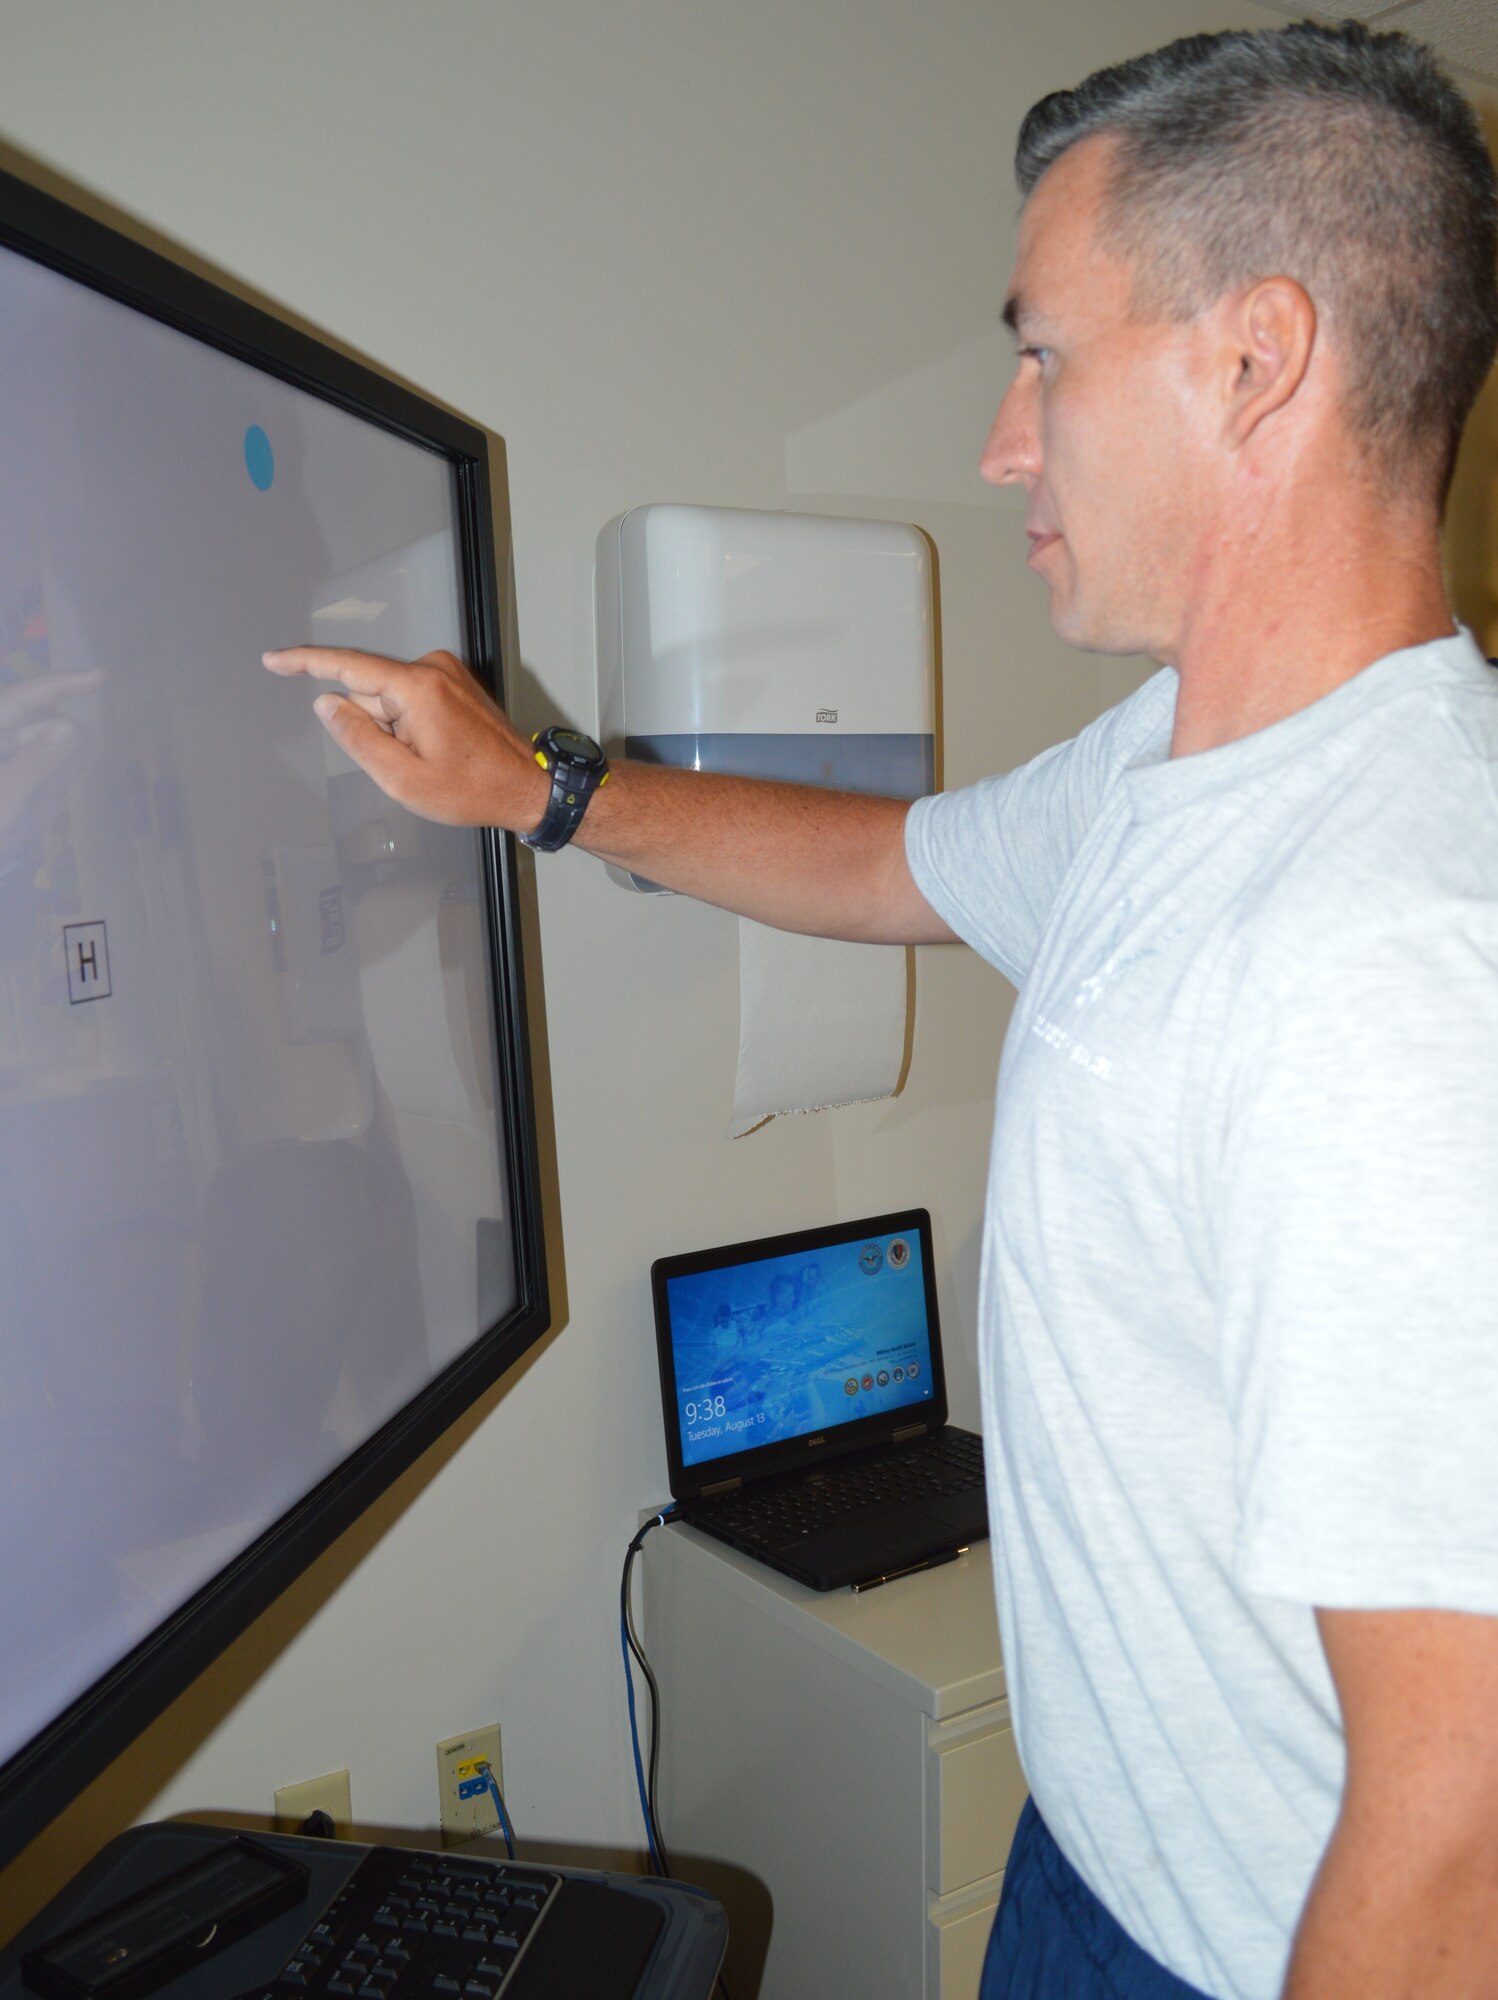 Air Force 1st Lt. Jason Hibbetts practices his cognitive function by touching a moving dot on a video screen Aug. 13 at the Brain Injury Rehabilitation Service at Brooke Army Medical Center at Joint Base San Antonio-Fort Sam Houston. The BIRS provides comprehensive outpatient neurorehabilitation for service members, family members and military retirees recovering from a stroke or other brain injuries using an interdisciplinary approach including physical therapy, occupational therapy, speech language pathology, recreational therapy, psychology, neuropsychology and case management. (Photo by Lori Newman)